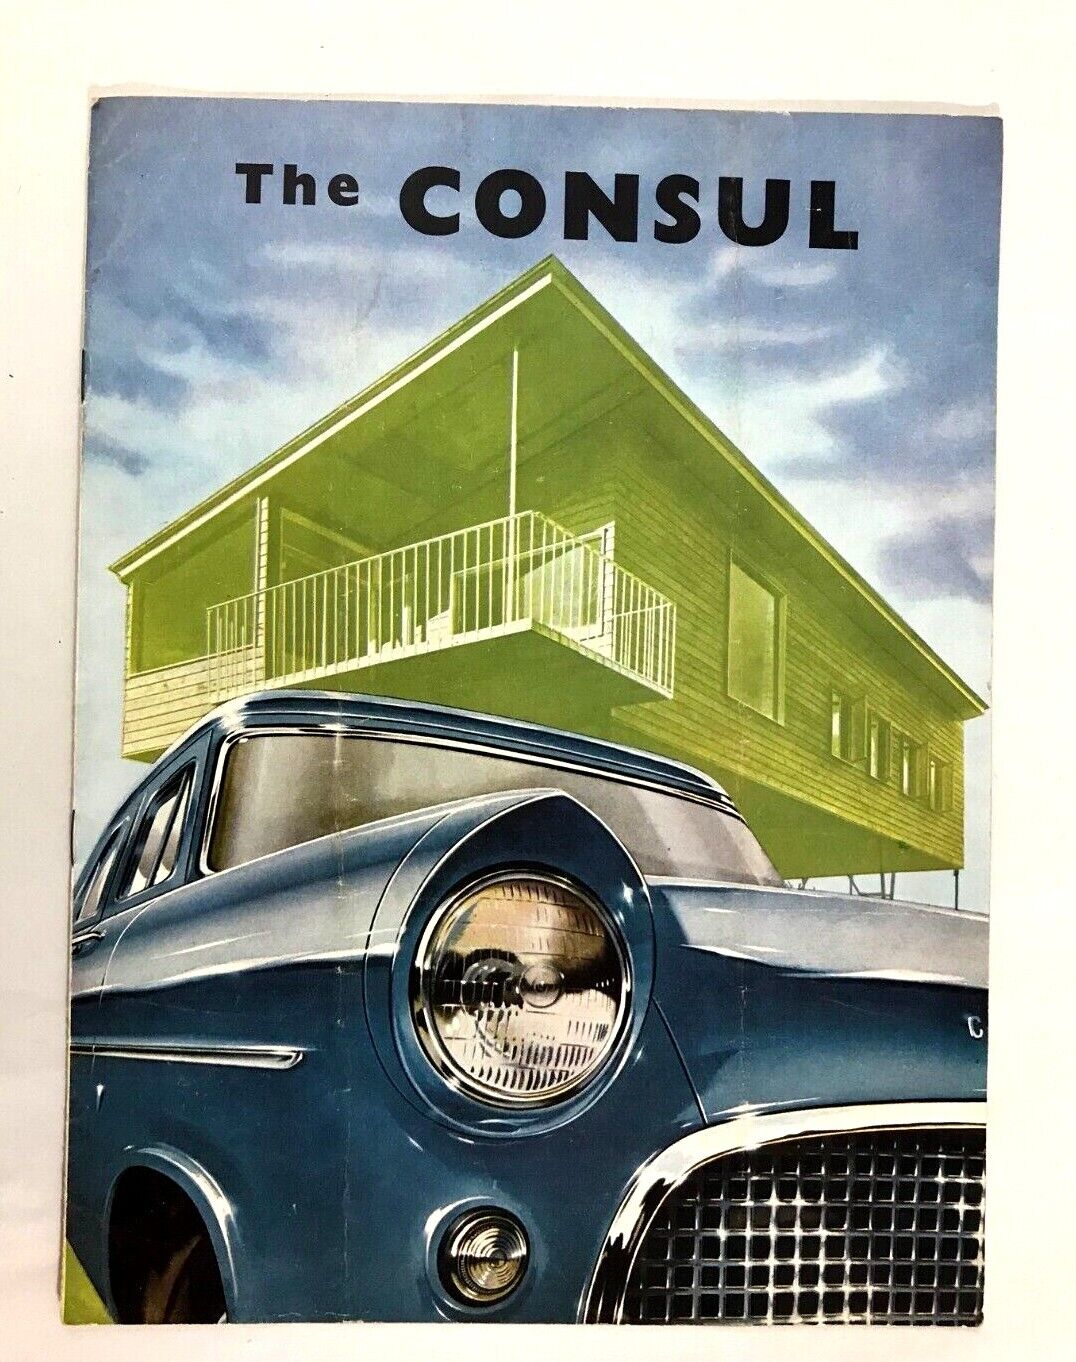 1957 THE CONSUL BY FORD MOTOR CO.: CAR: DEALER / DEALERSHIP SALES BROCHURE 1957